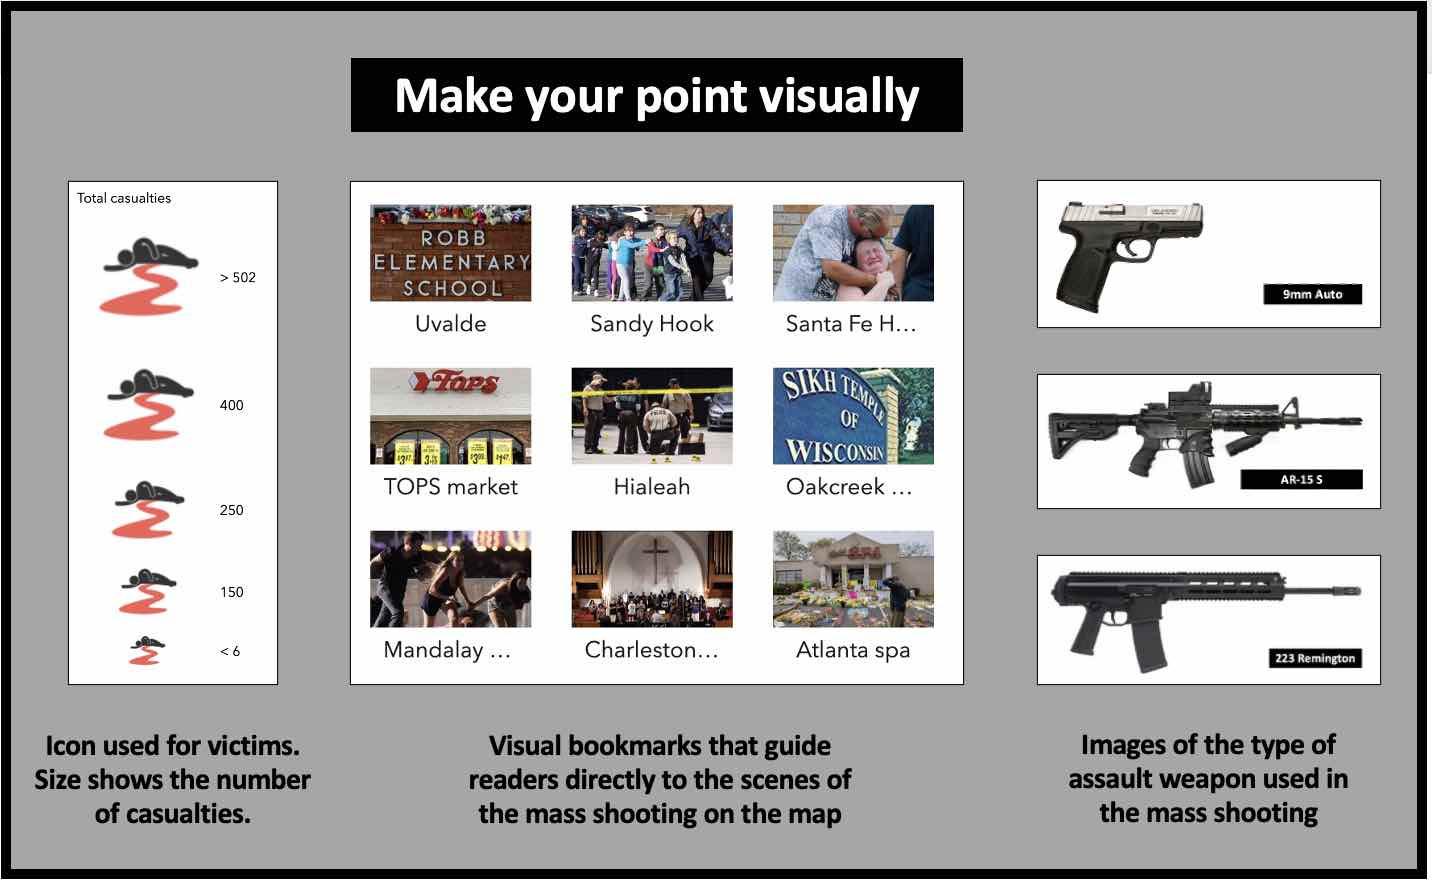 Use visuals and icons to make your point